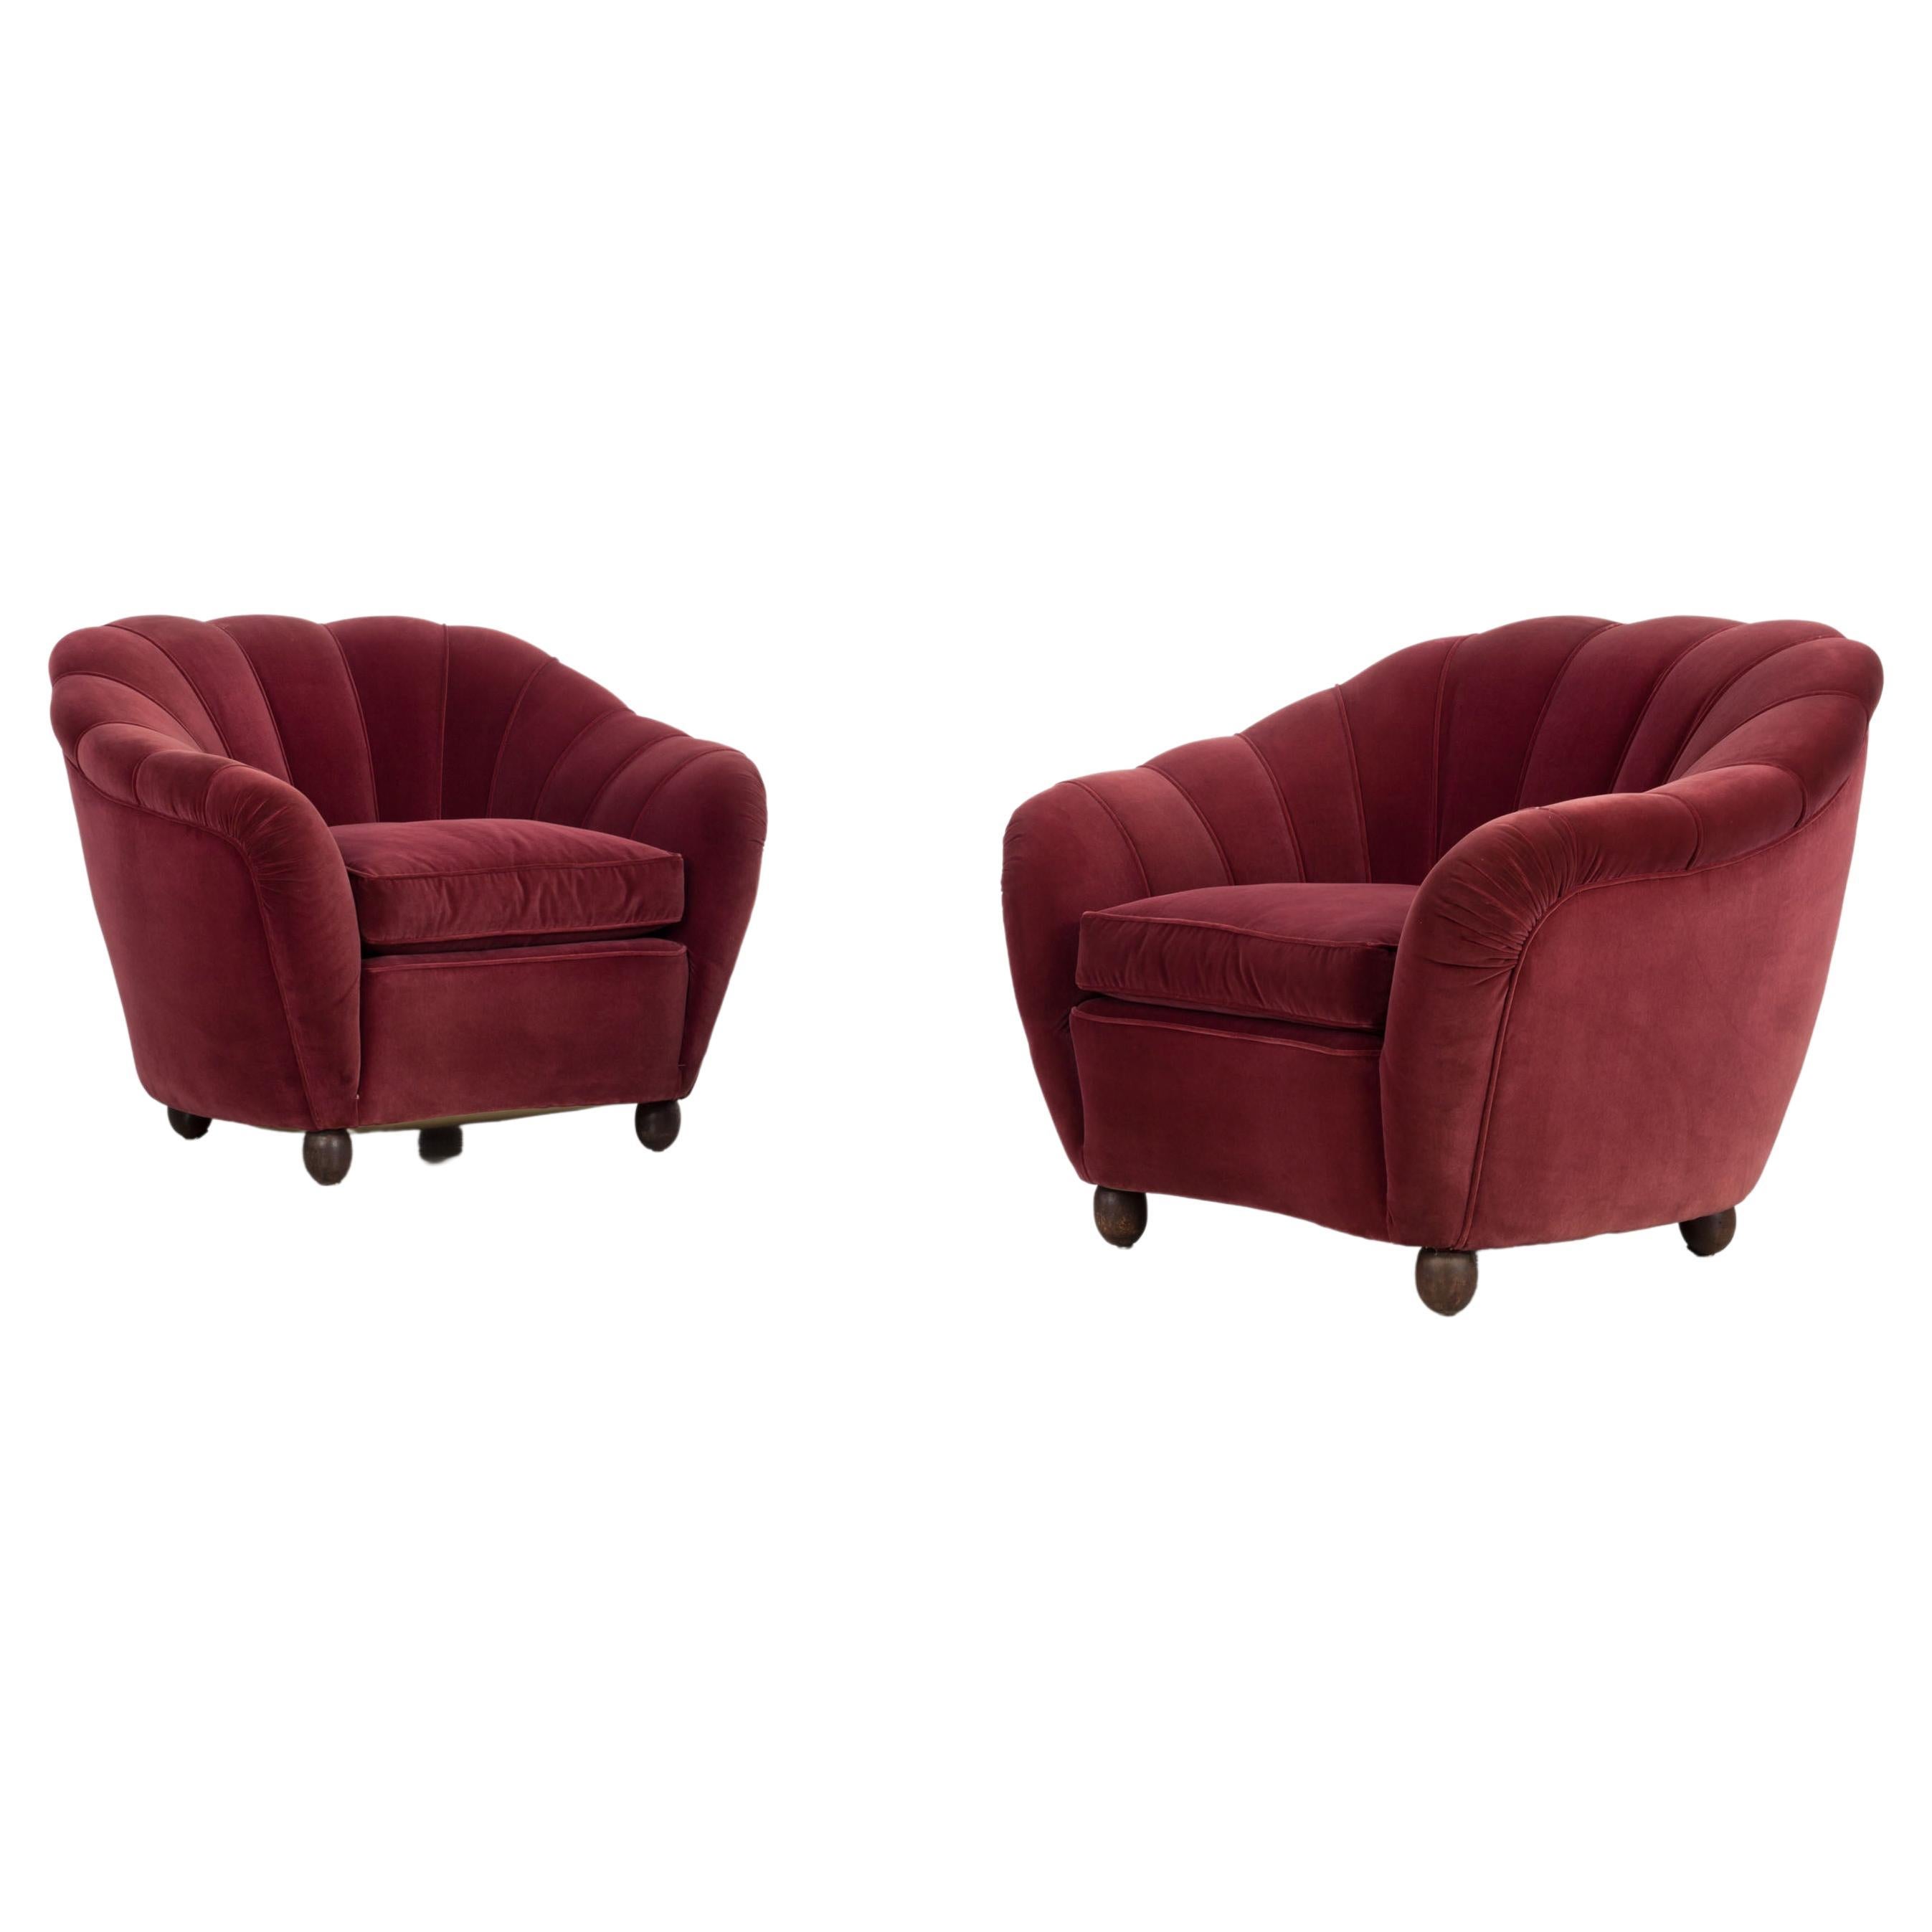 Italian Set of a Massive Sofa and Two Armchairs in Dark Red Velvet Cover, 1940s For Sale